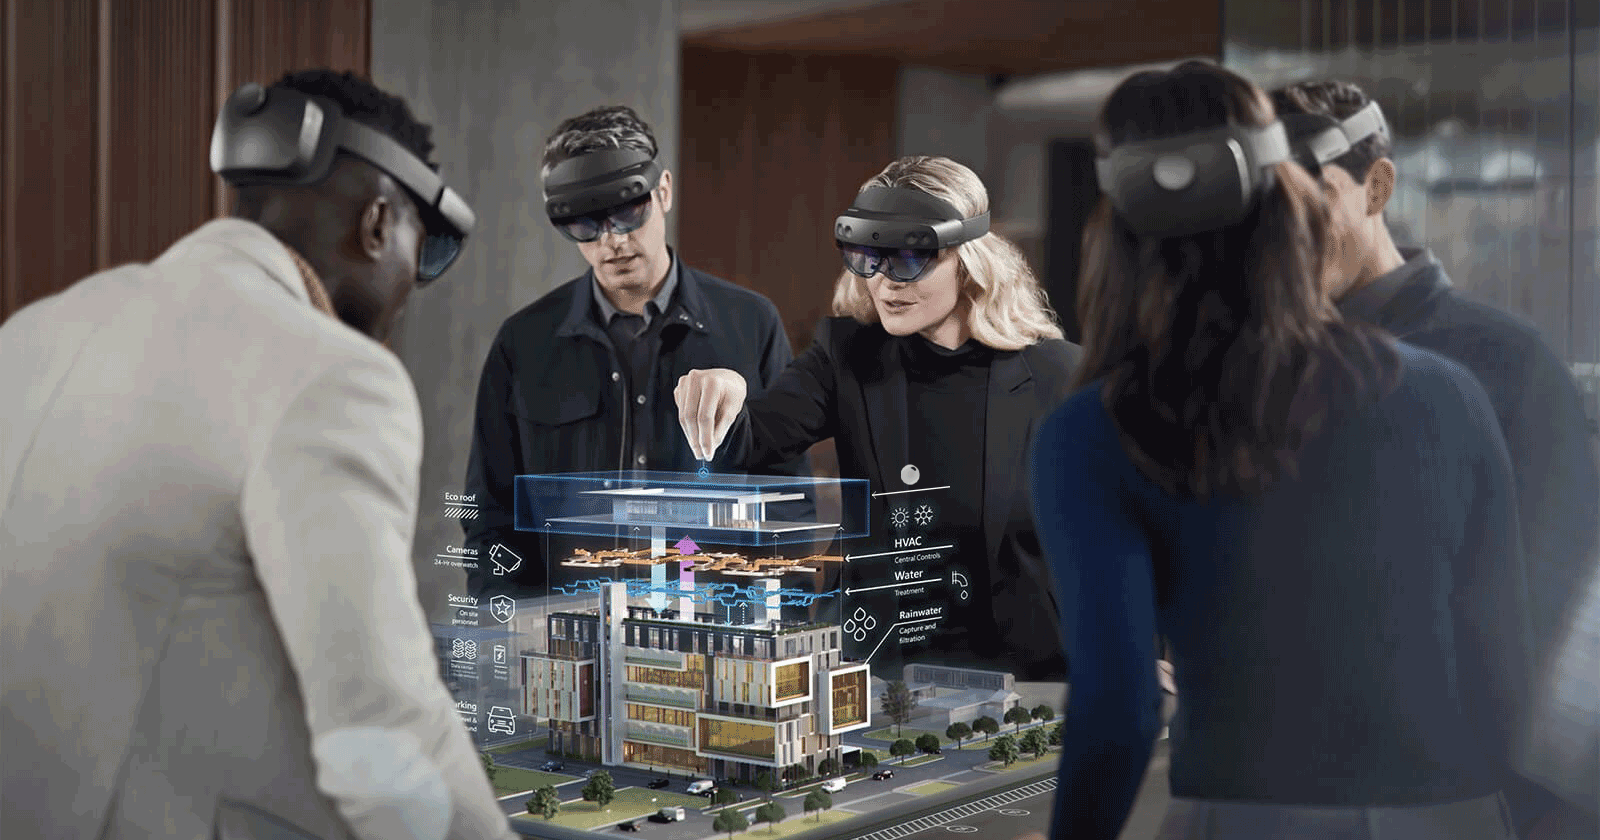 Microsoft Hololens Explained: How It Works and Which Business